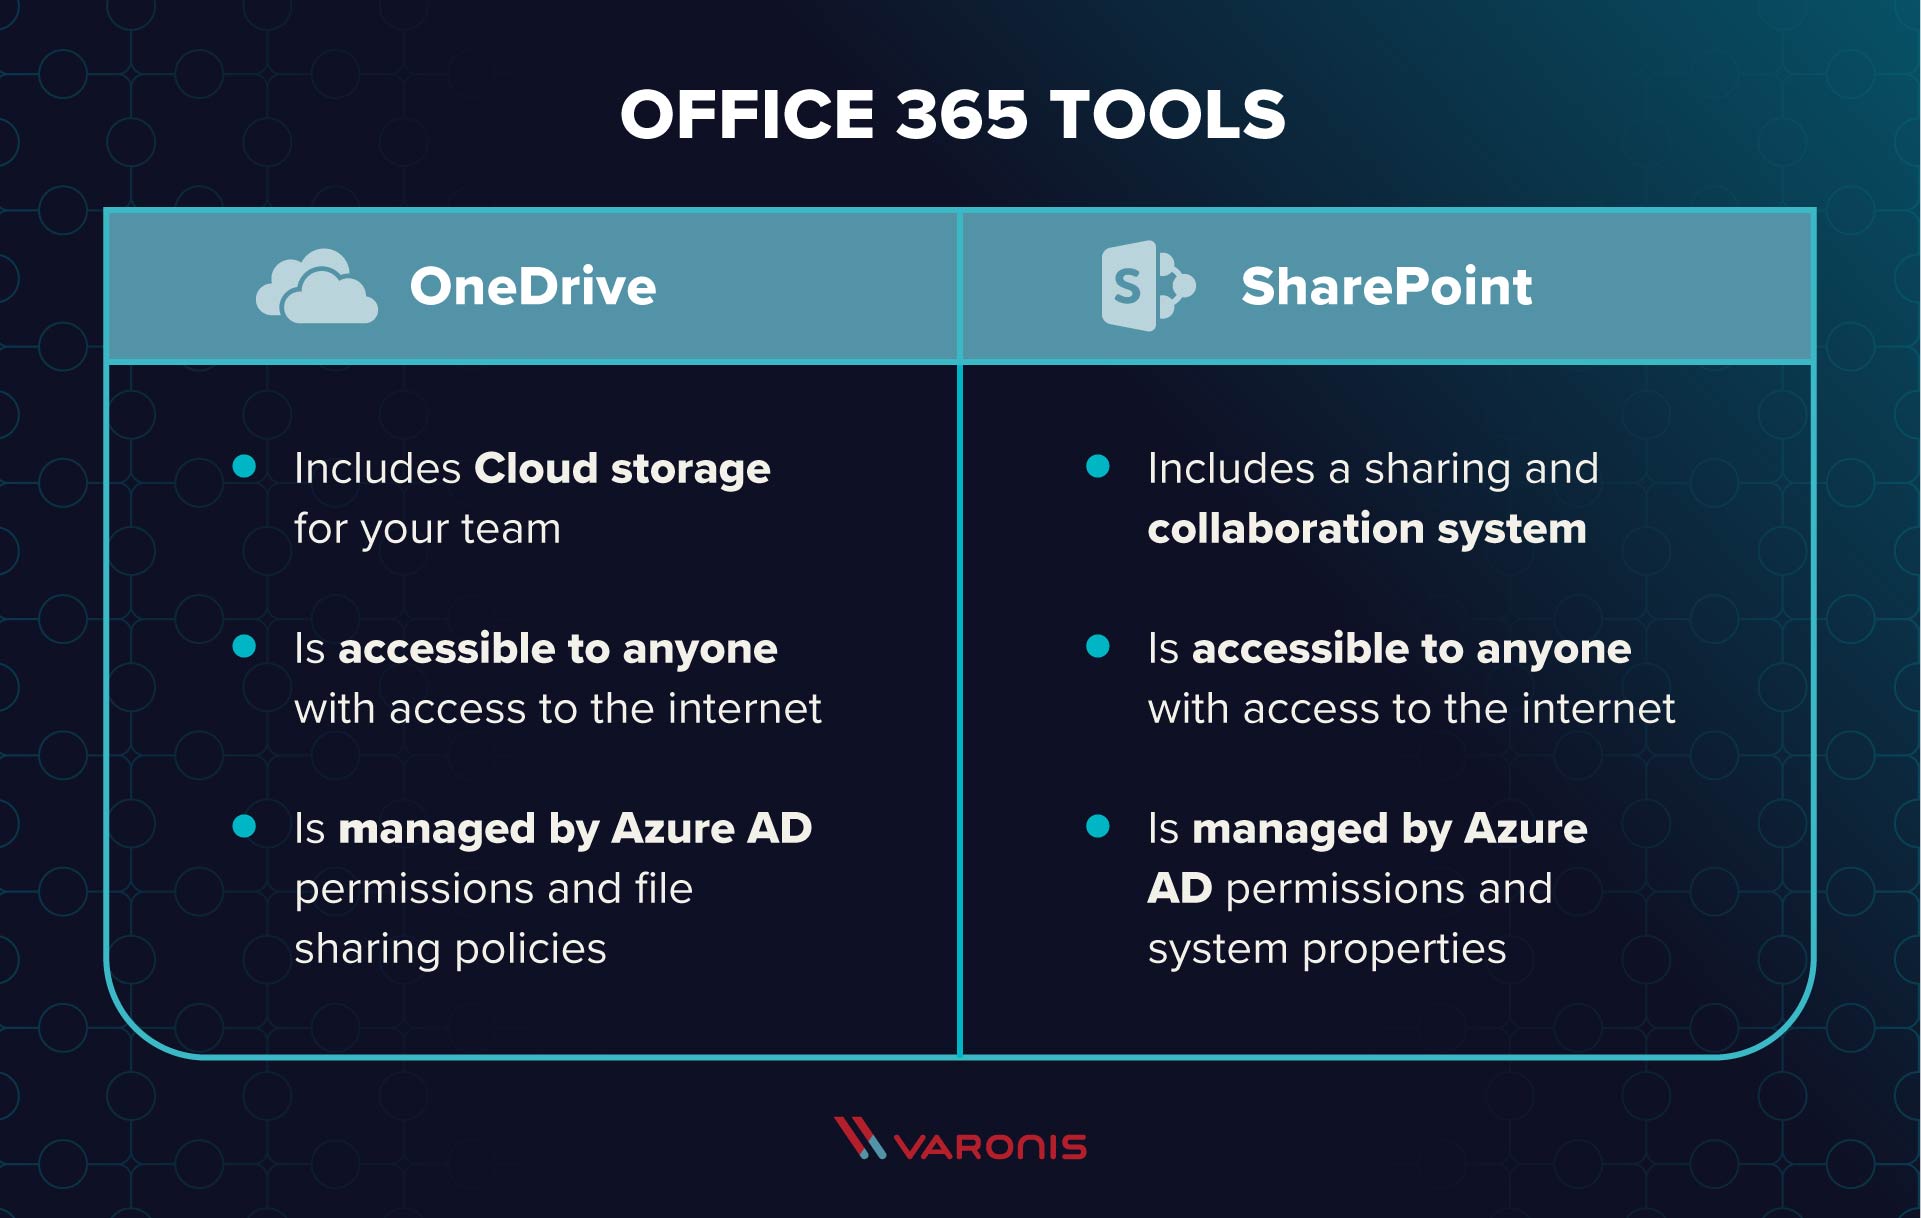 office 365 file sharing image of office 365 tools and comparison